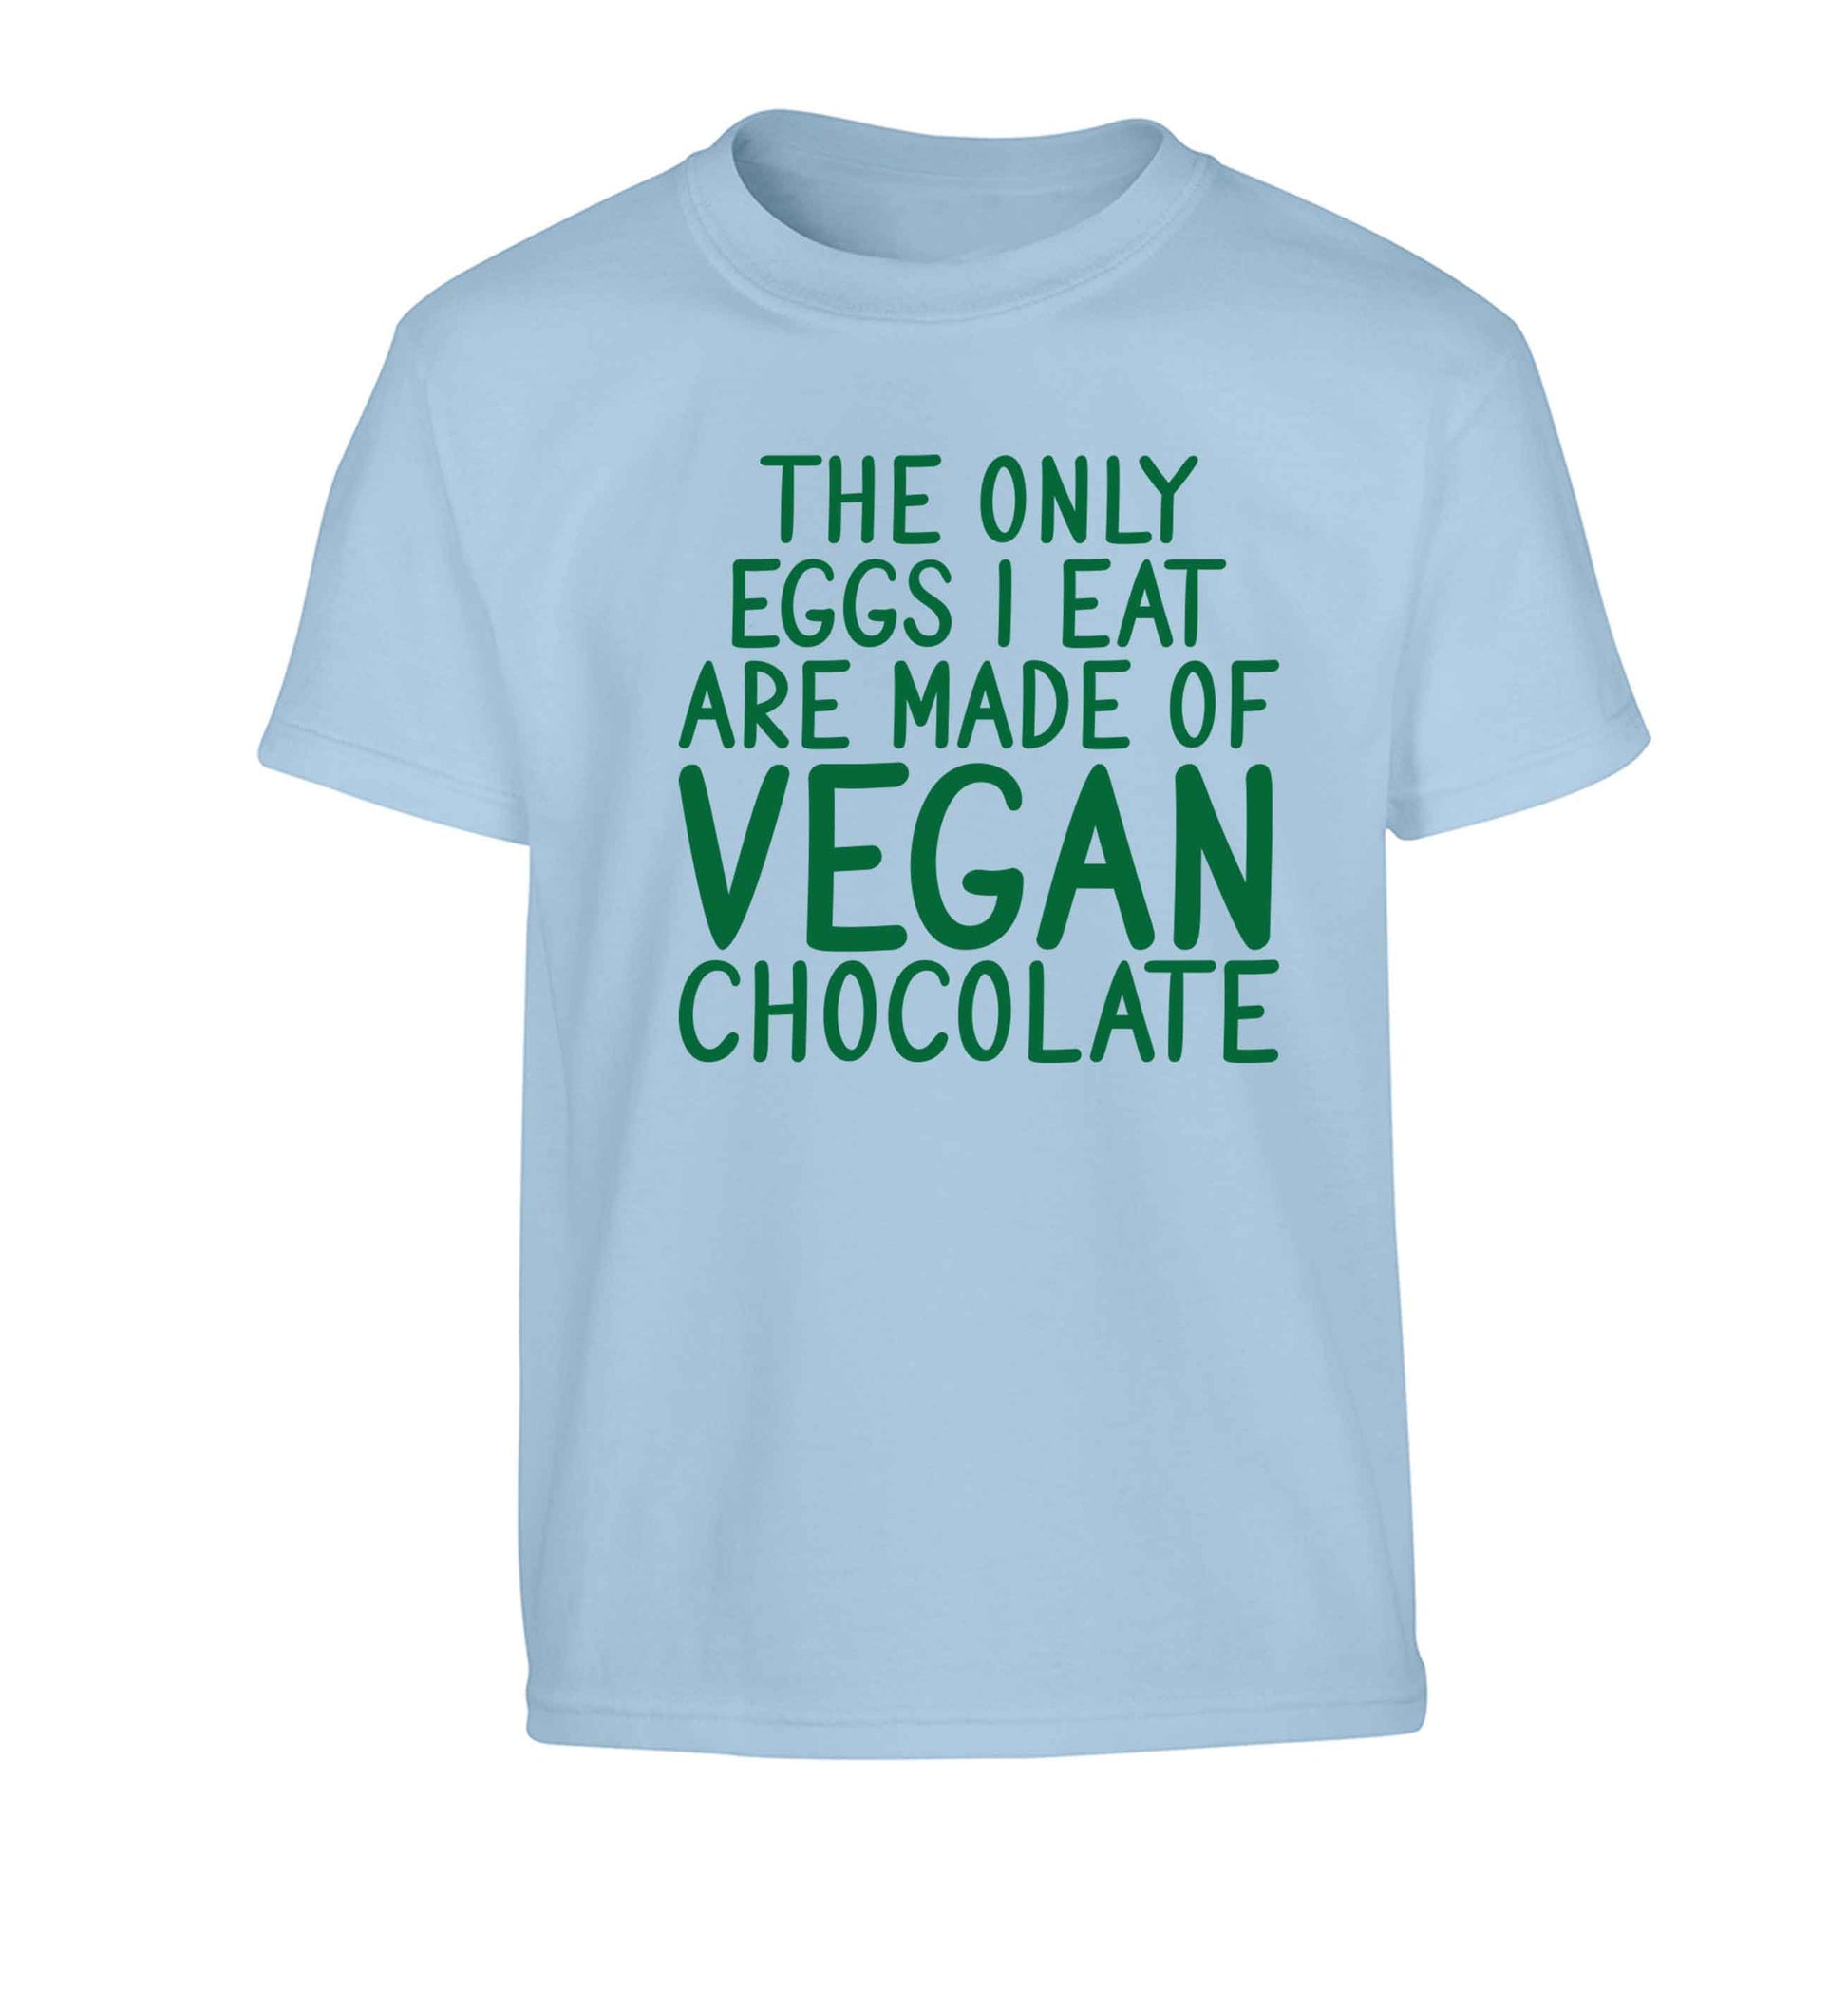 The only eggs I eat are made of vegan chocolate Children's light blue Tshirt 12-13 Years